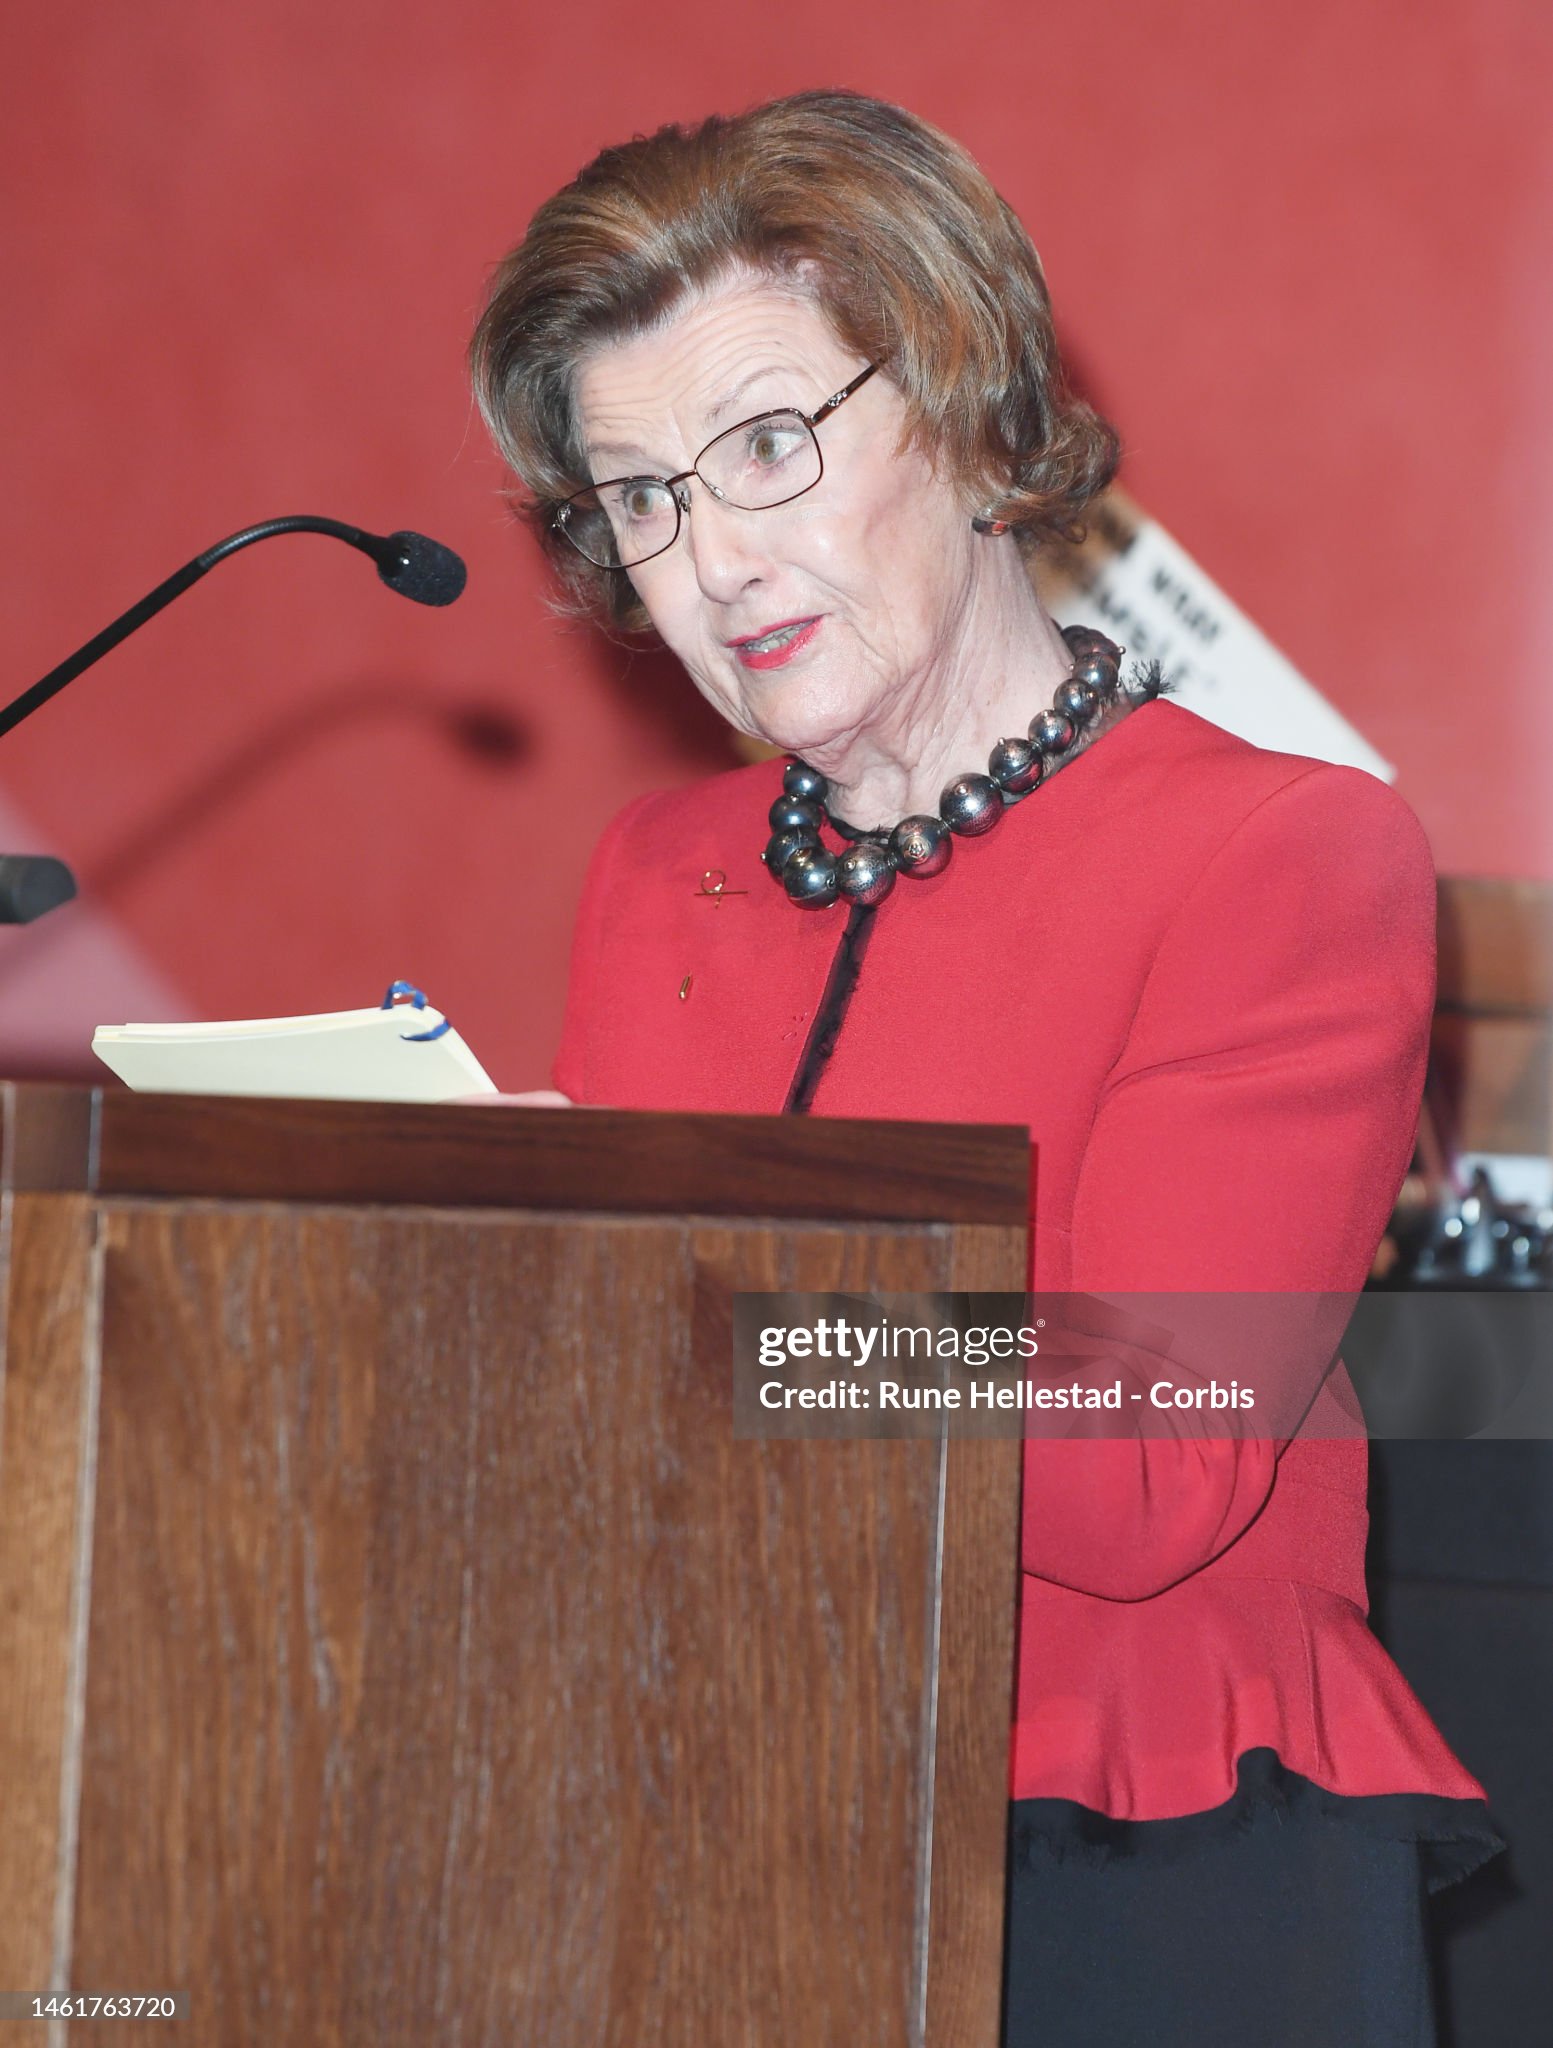 https://media.gettyimages.com/id/1461763720/de/foto/queen-sonja-of-norway-attends-the-opening-of-carroll-dunhams-exhibition-where-am-i-prints-1985.jpg?s=2048x2048&w=gi&k=20&c=VPsaNFqWNjgTwvmfmS2yL5s92rR60wZQRfc8qDZNEug=